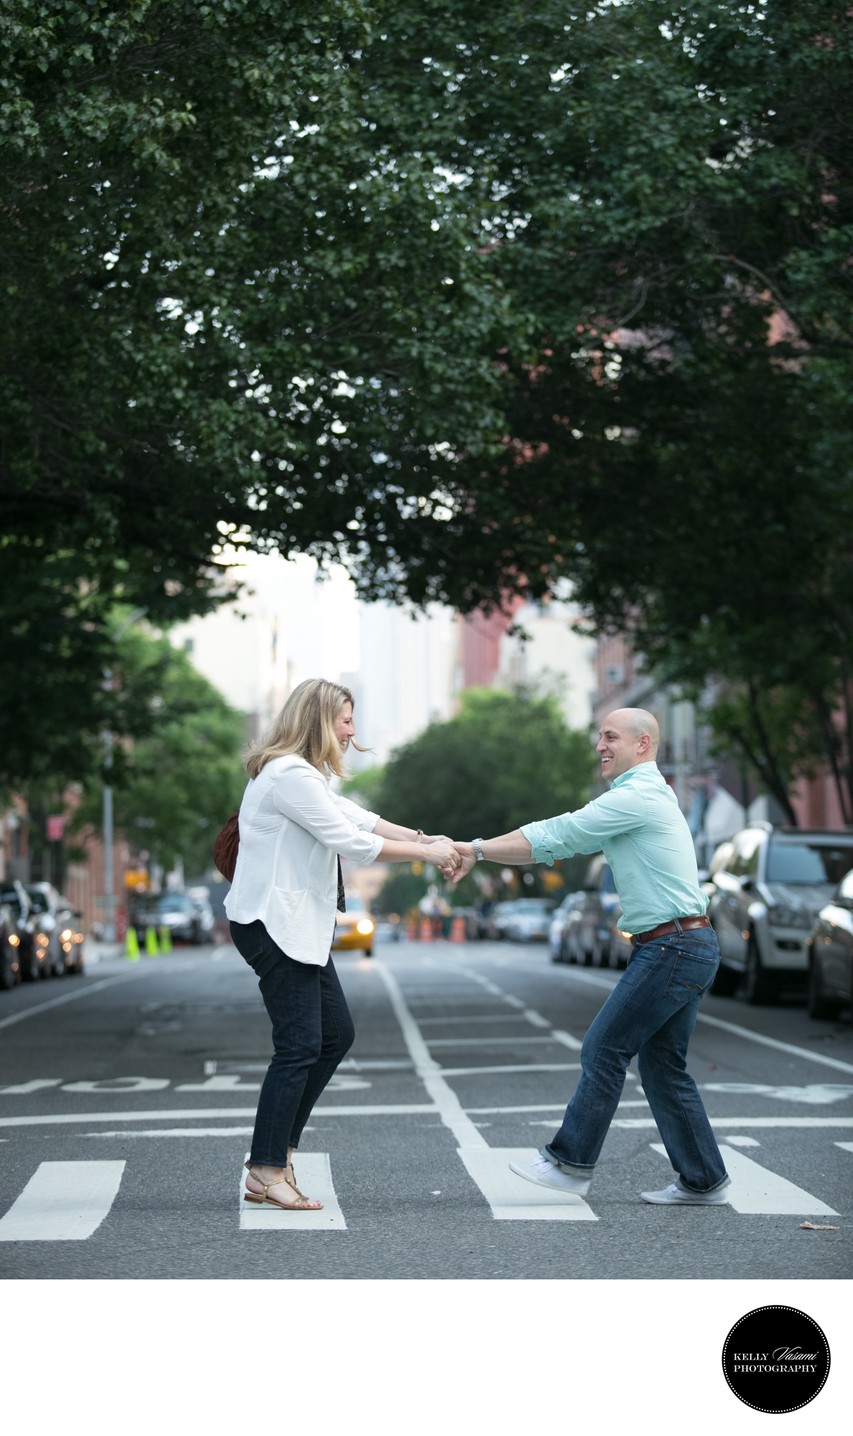 New York City Engagement Session | Crossing the Street